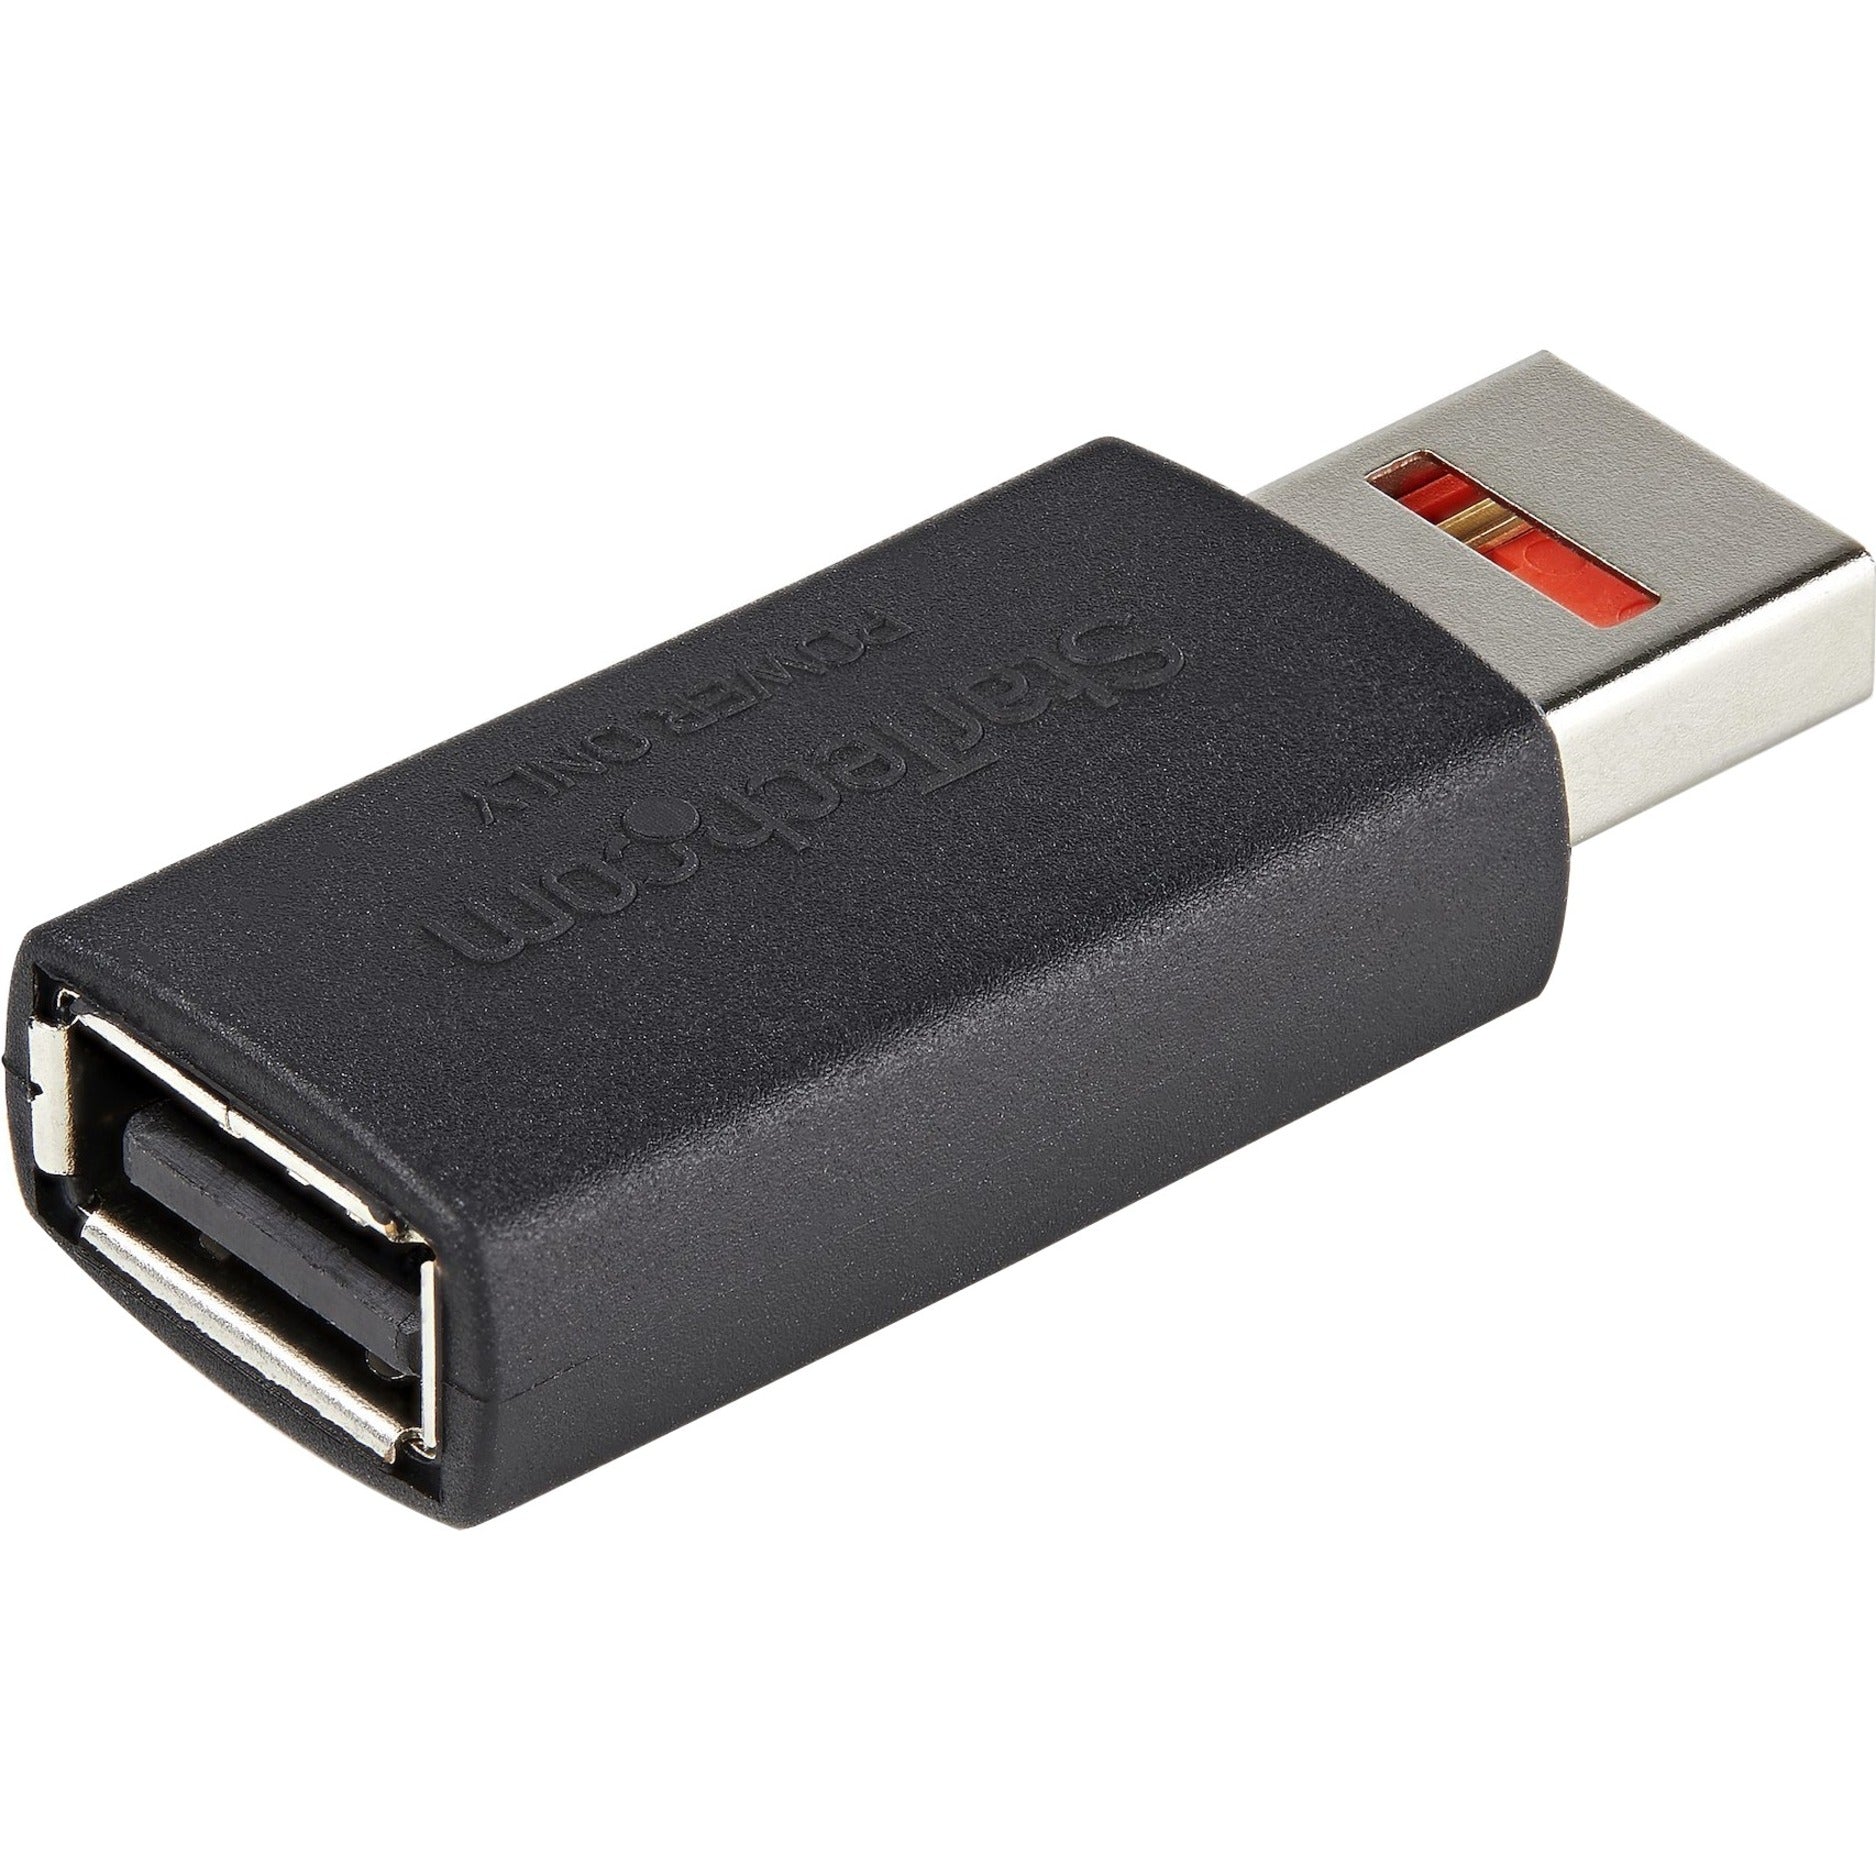 StarTech.com USBSCHAAMF USB Data Transfer Adapter, Male/Female USB-A Data Blocking Charge/Power-Only Charging Adapter for Phone/Tablet